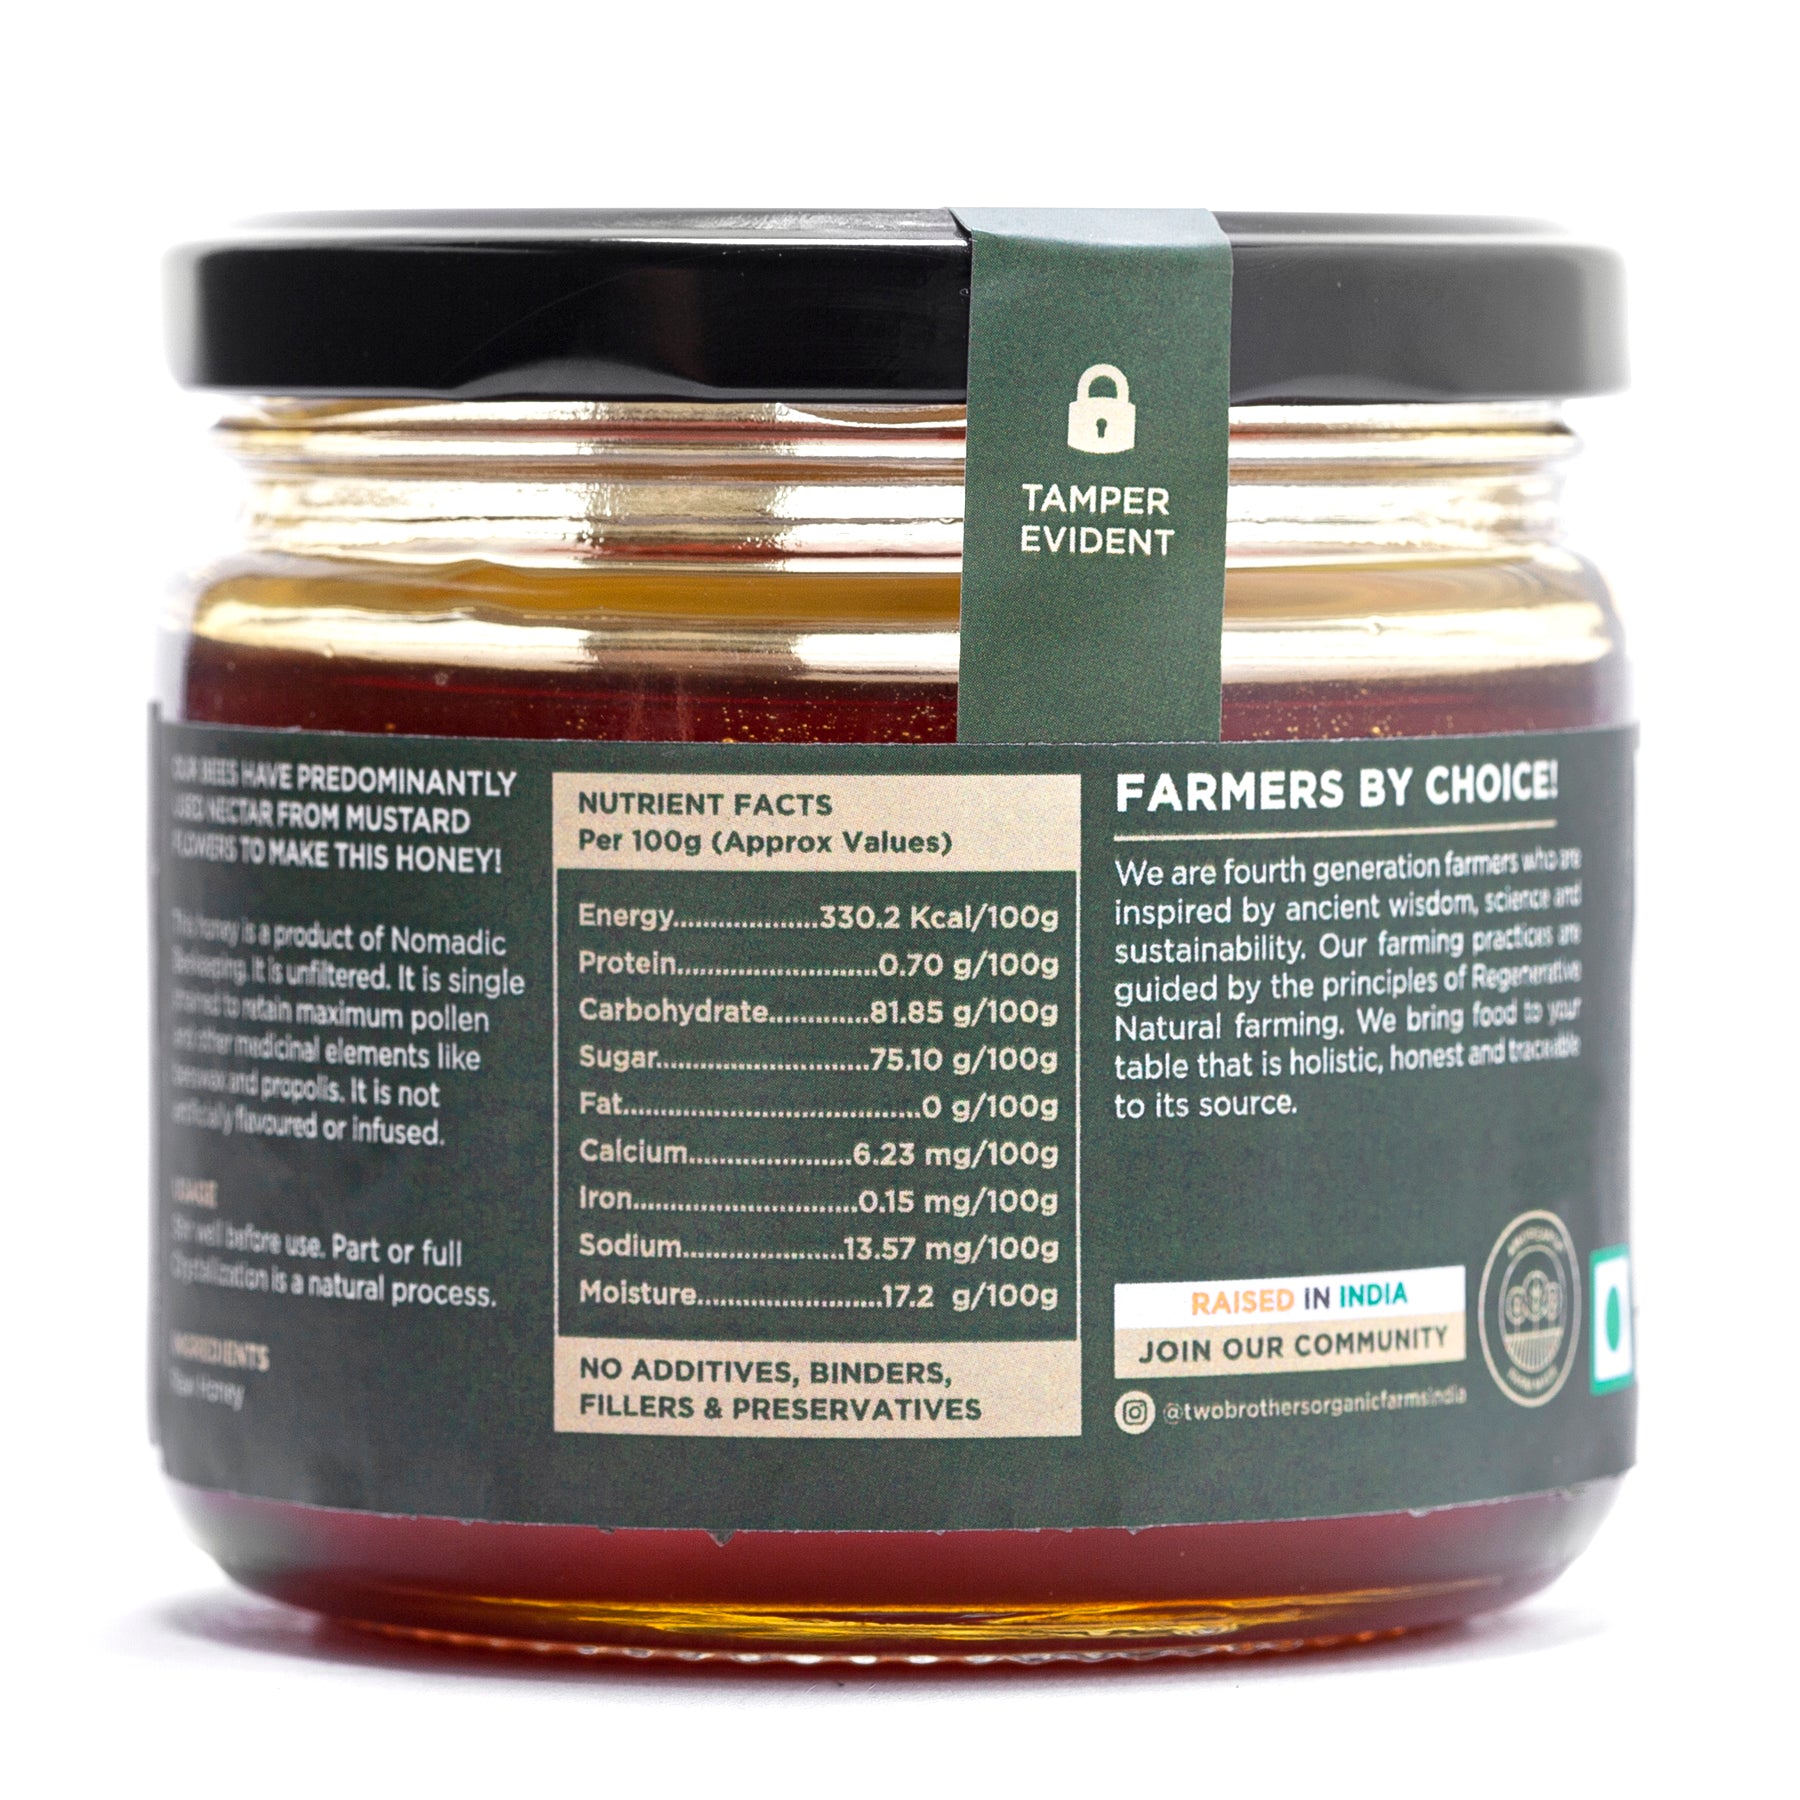 Product: Two Brothers Mustard Honey, Raw Mono-Floral Unfiltered 350 g